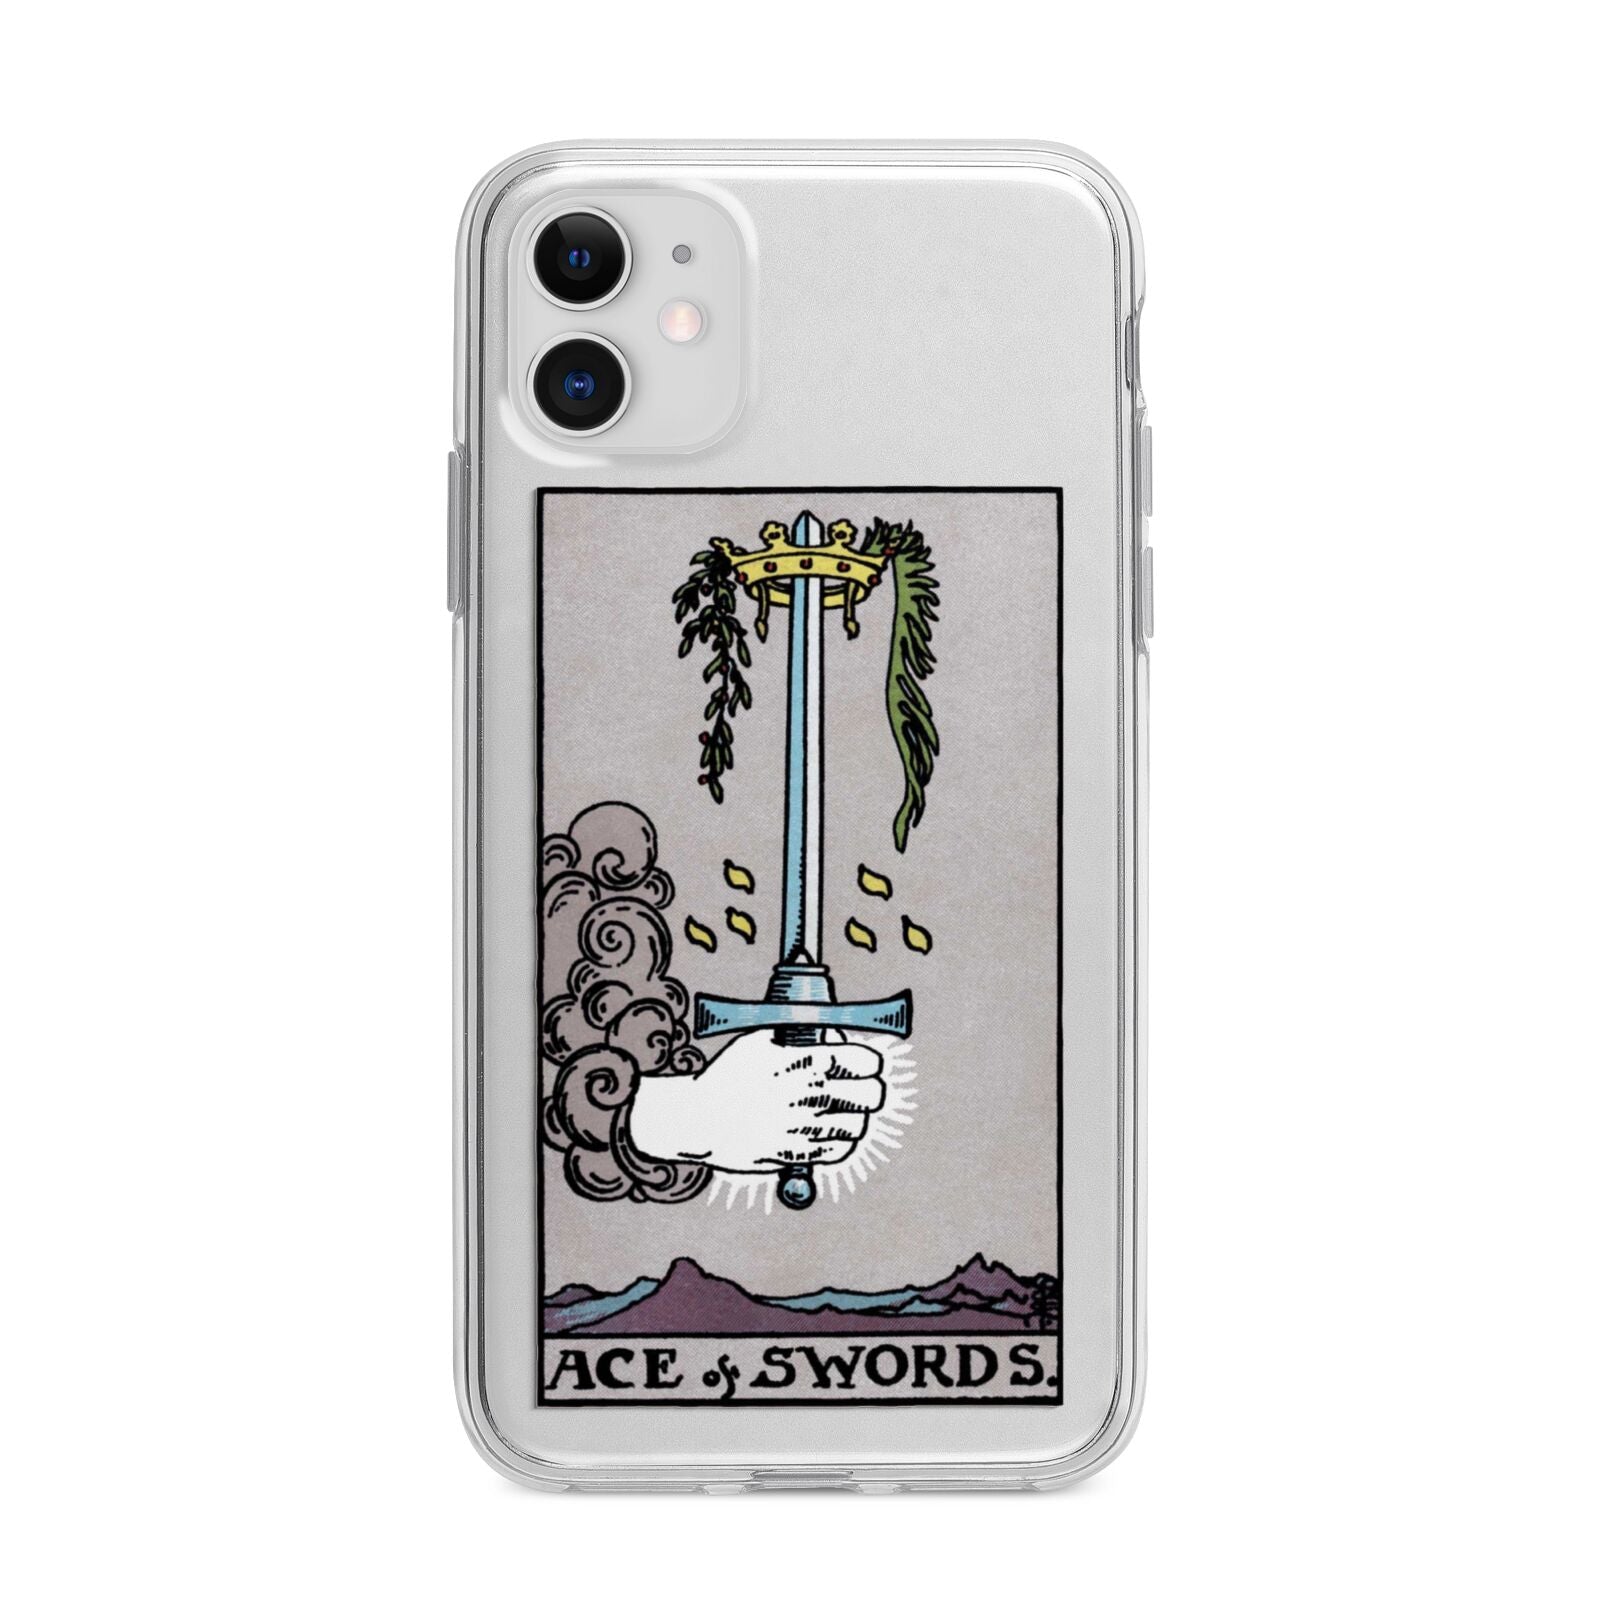 Ace of Swords Tarot Card Apple iPhone 11 in White with Bumper Case